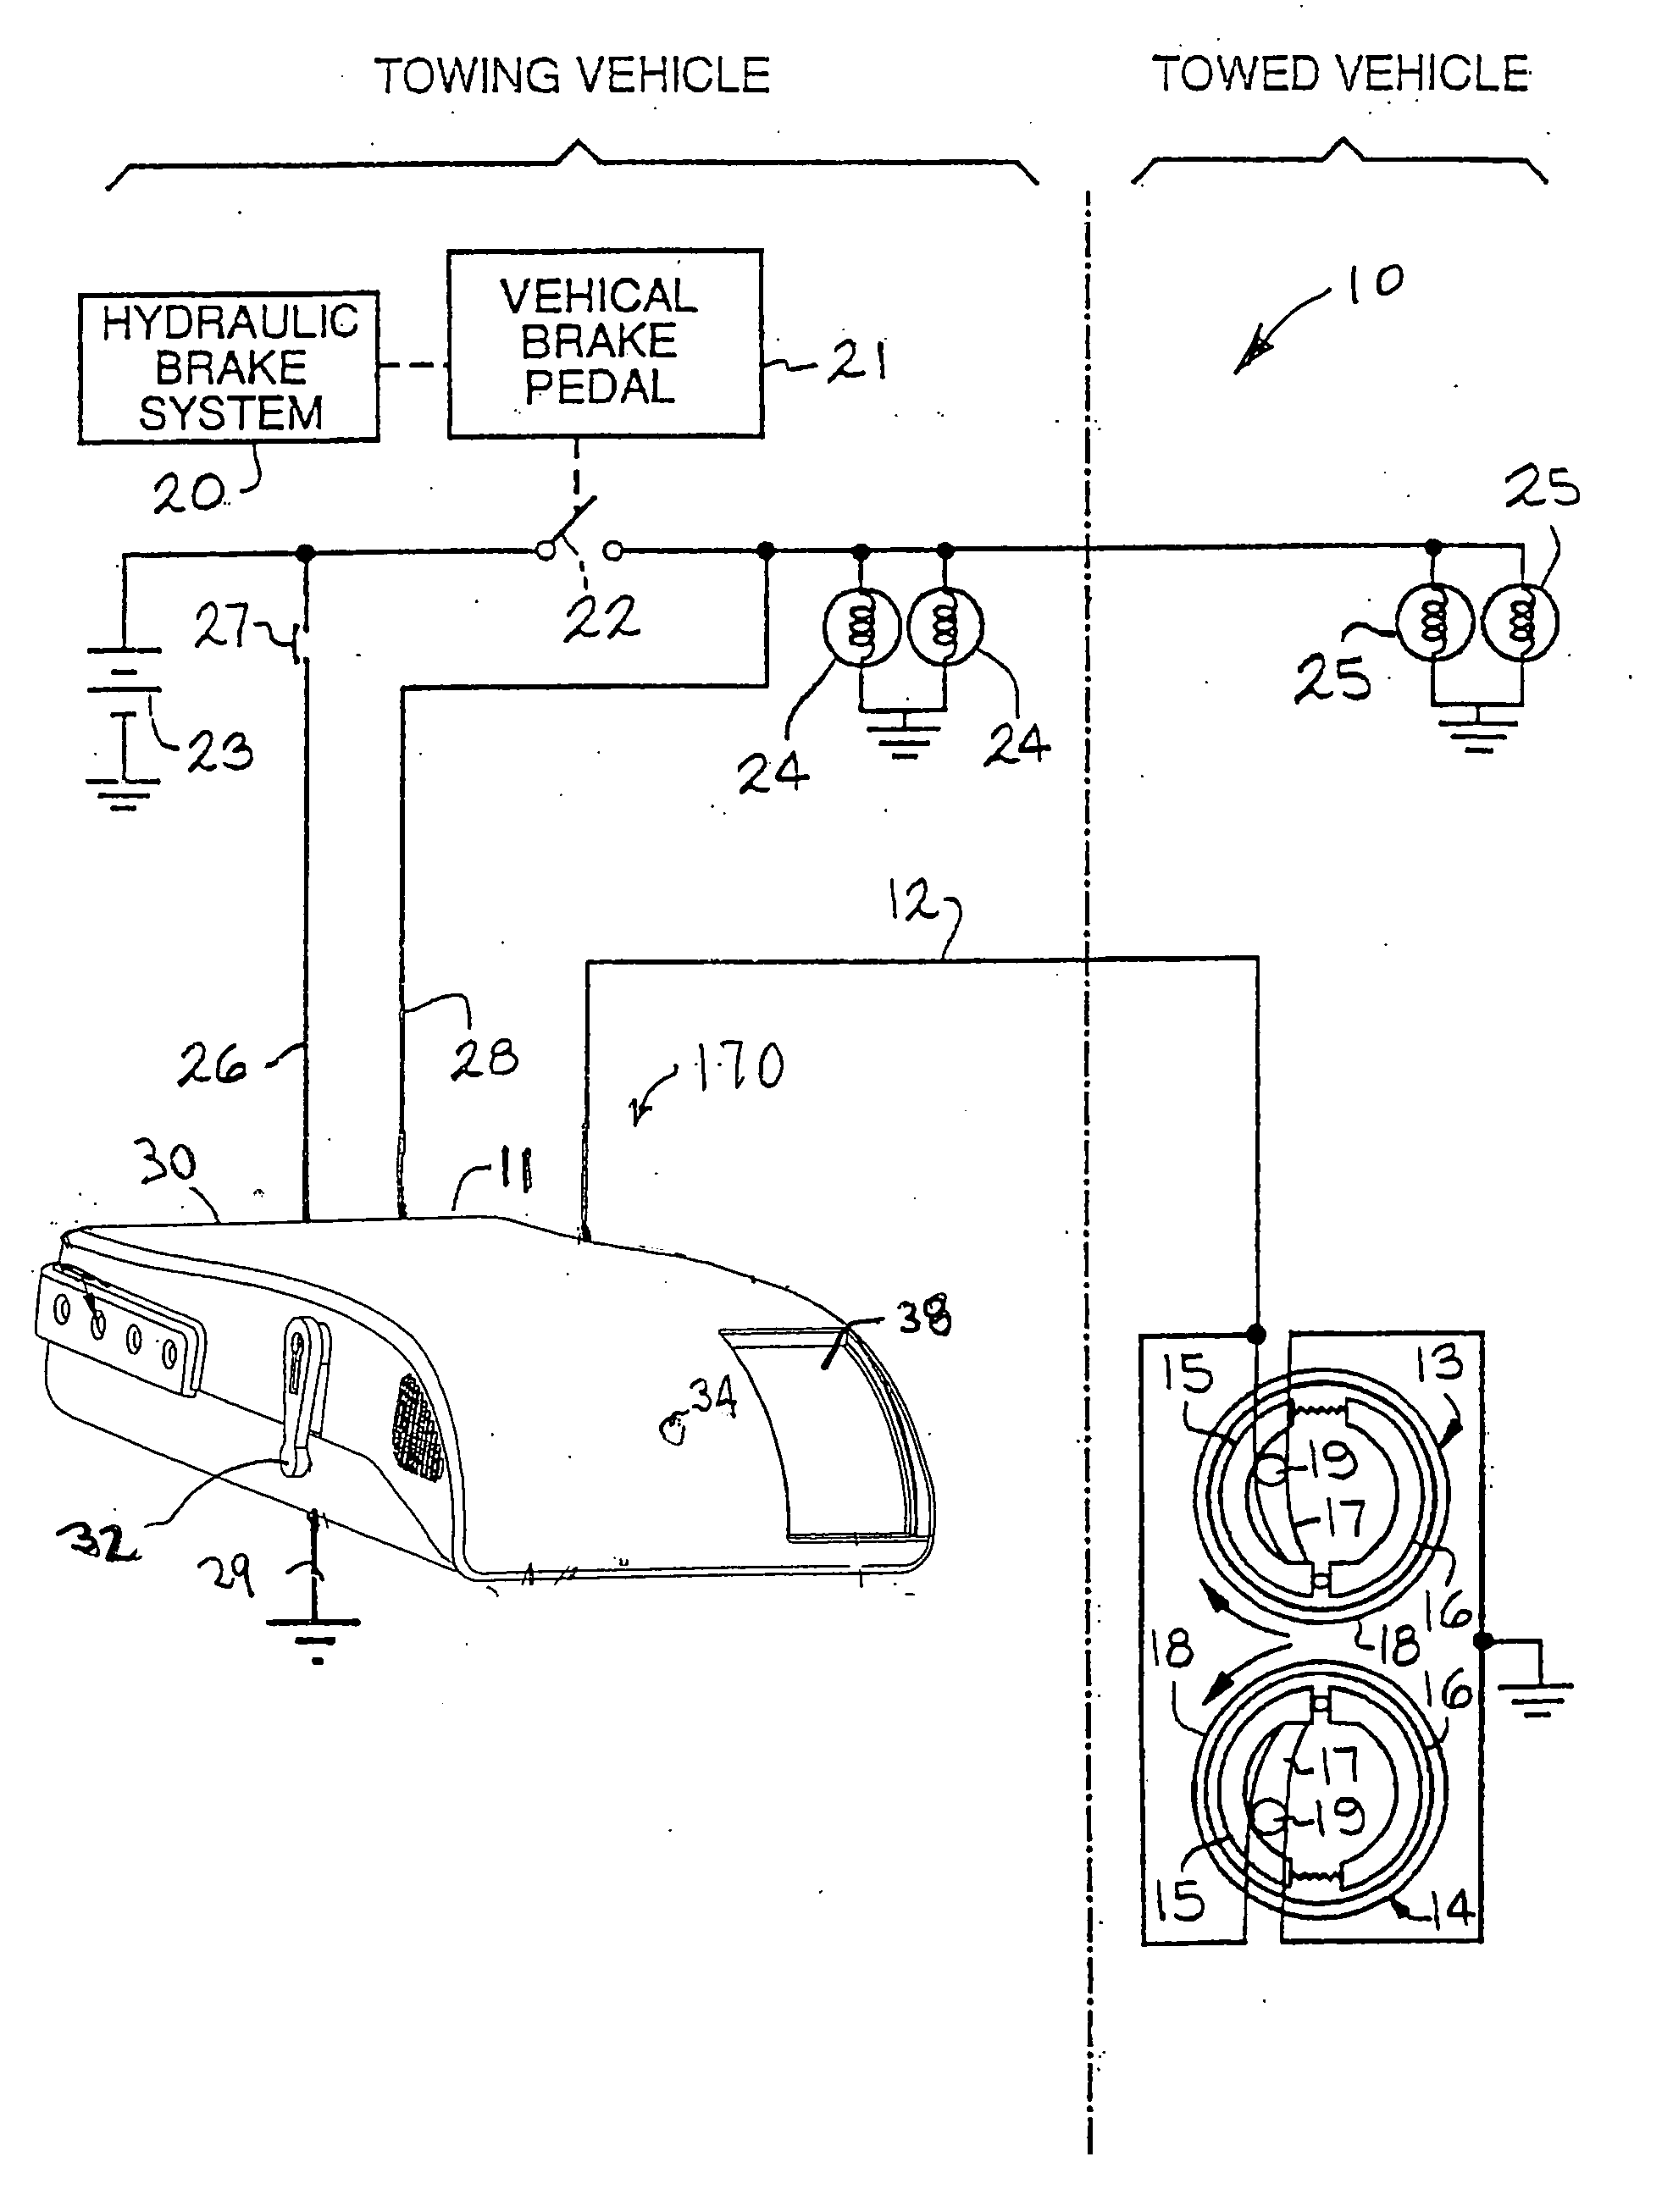 Electric trailer brake controller with an adjustable accelerometer mounting